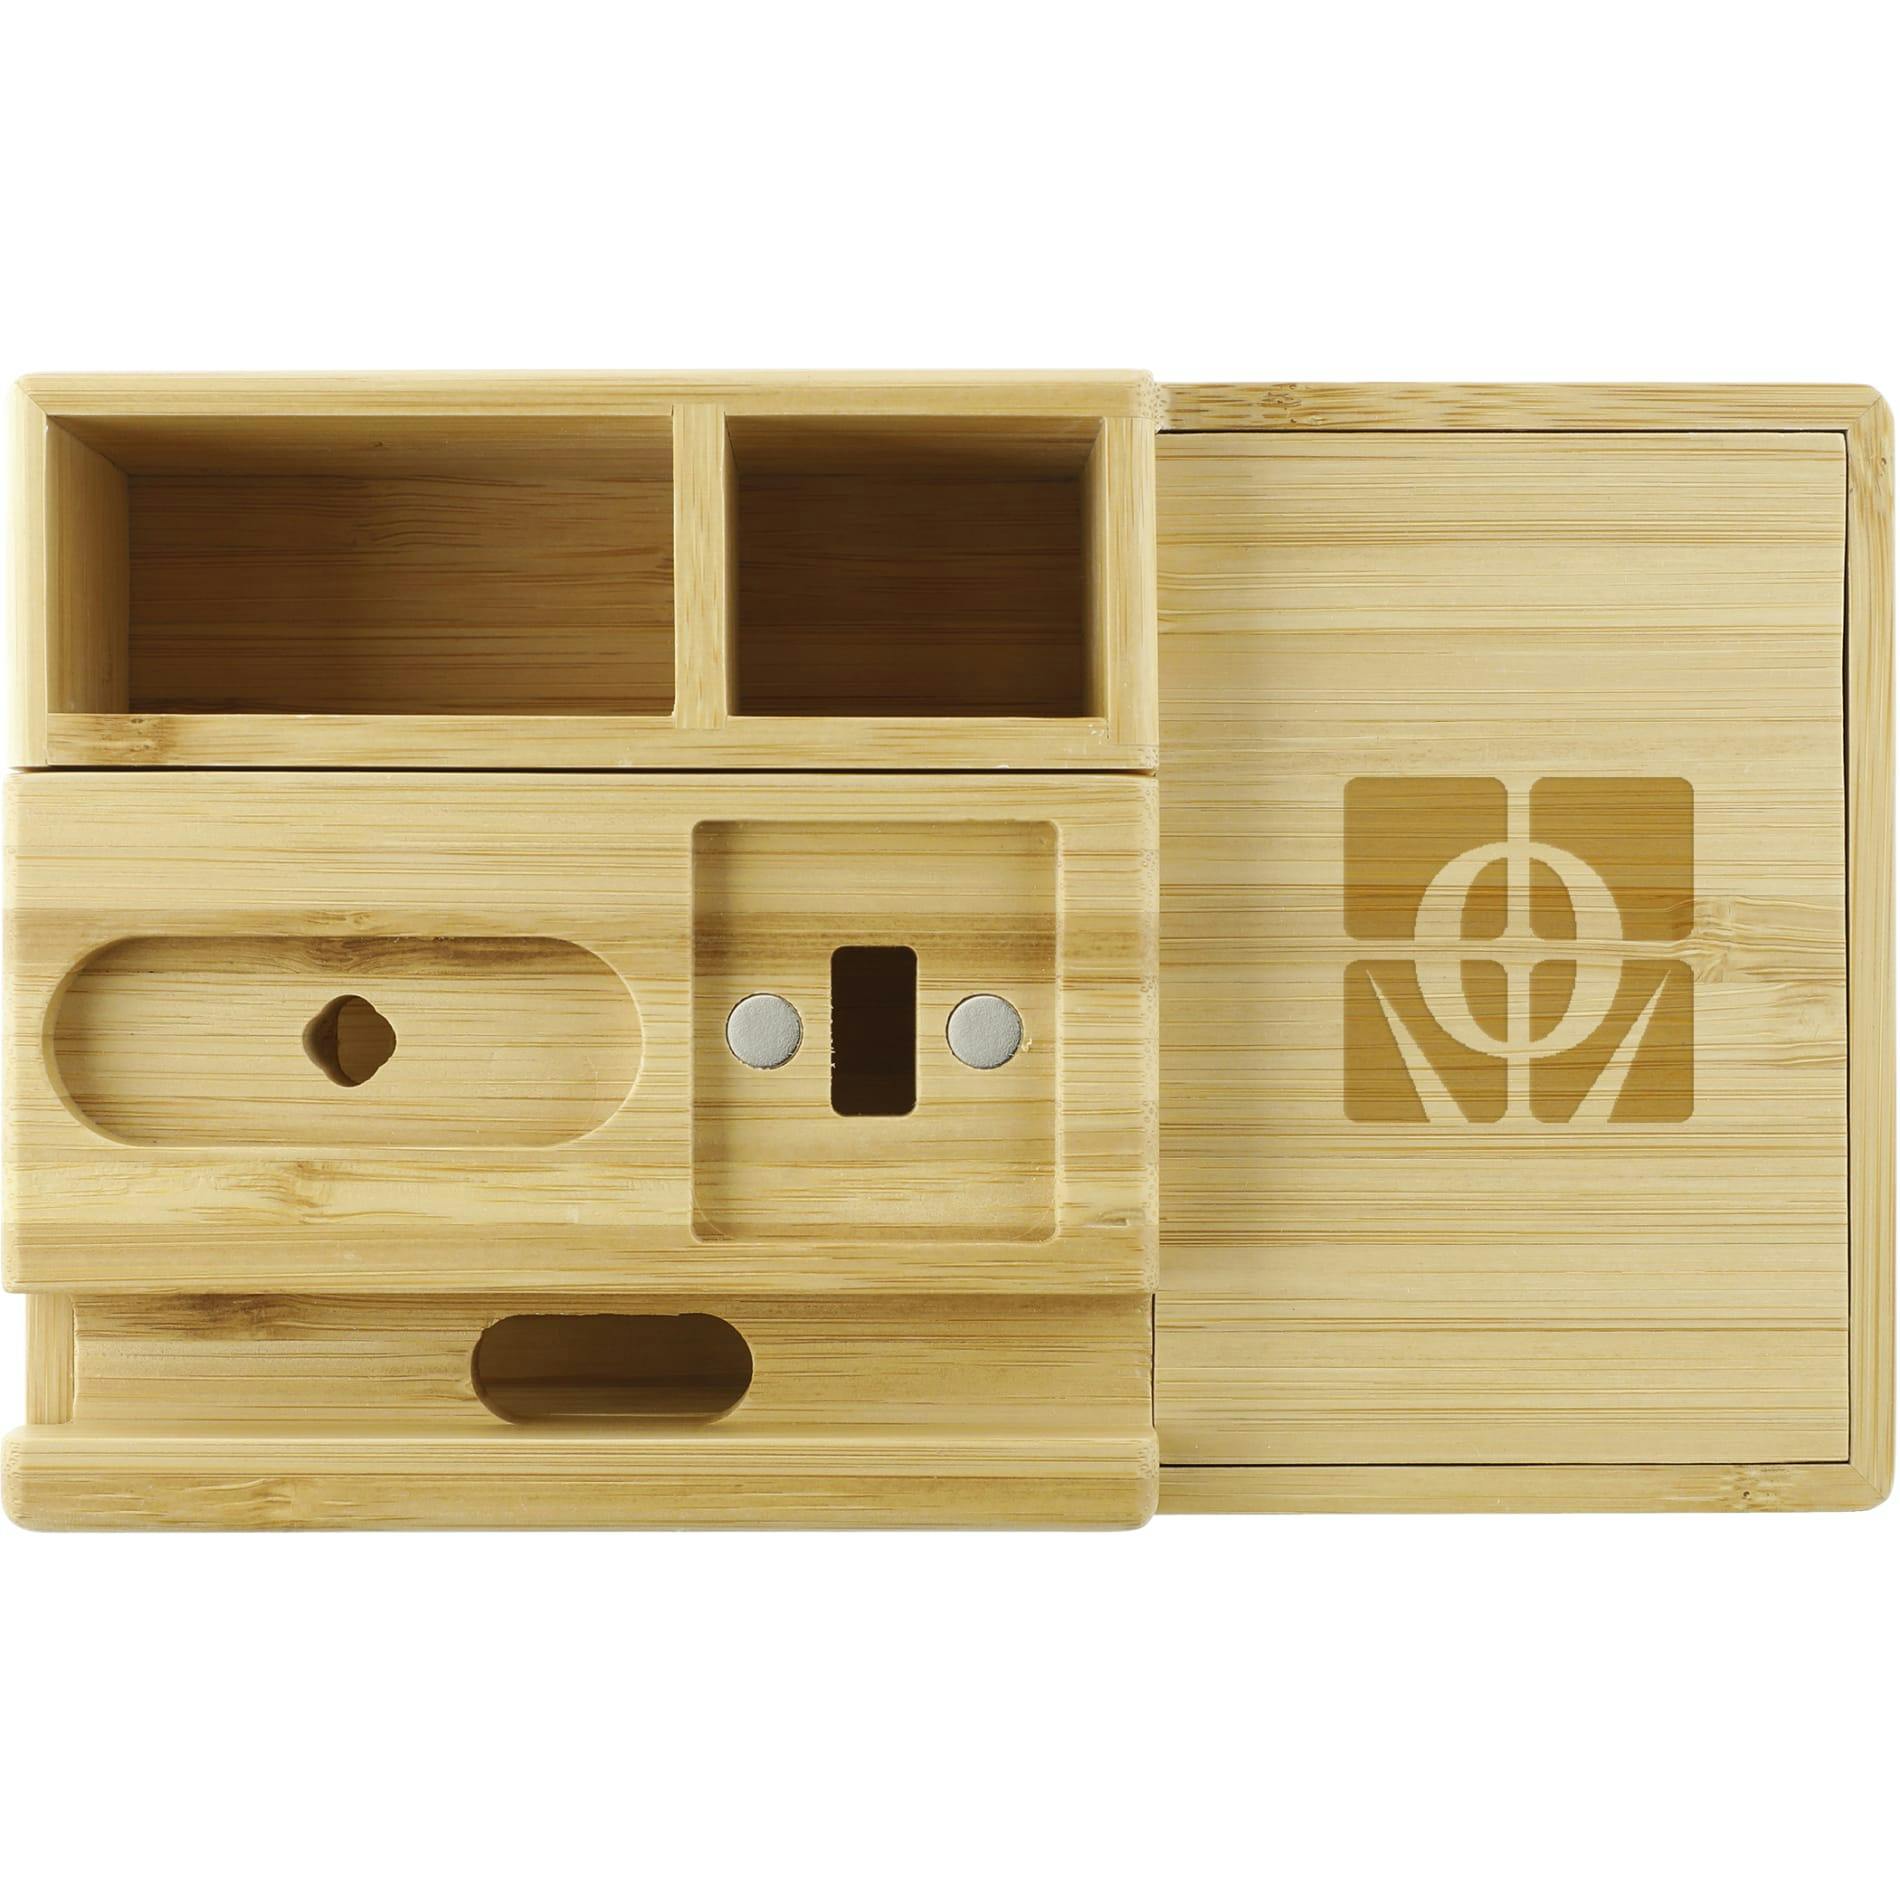 Bamboo Fast Wireless Charging Dock Station - additional Image 2